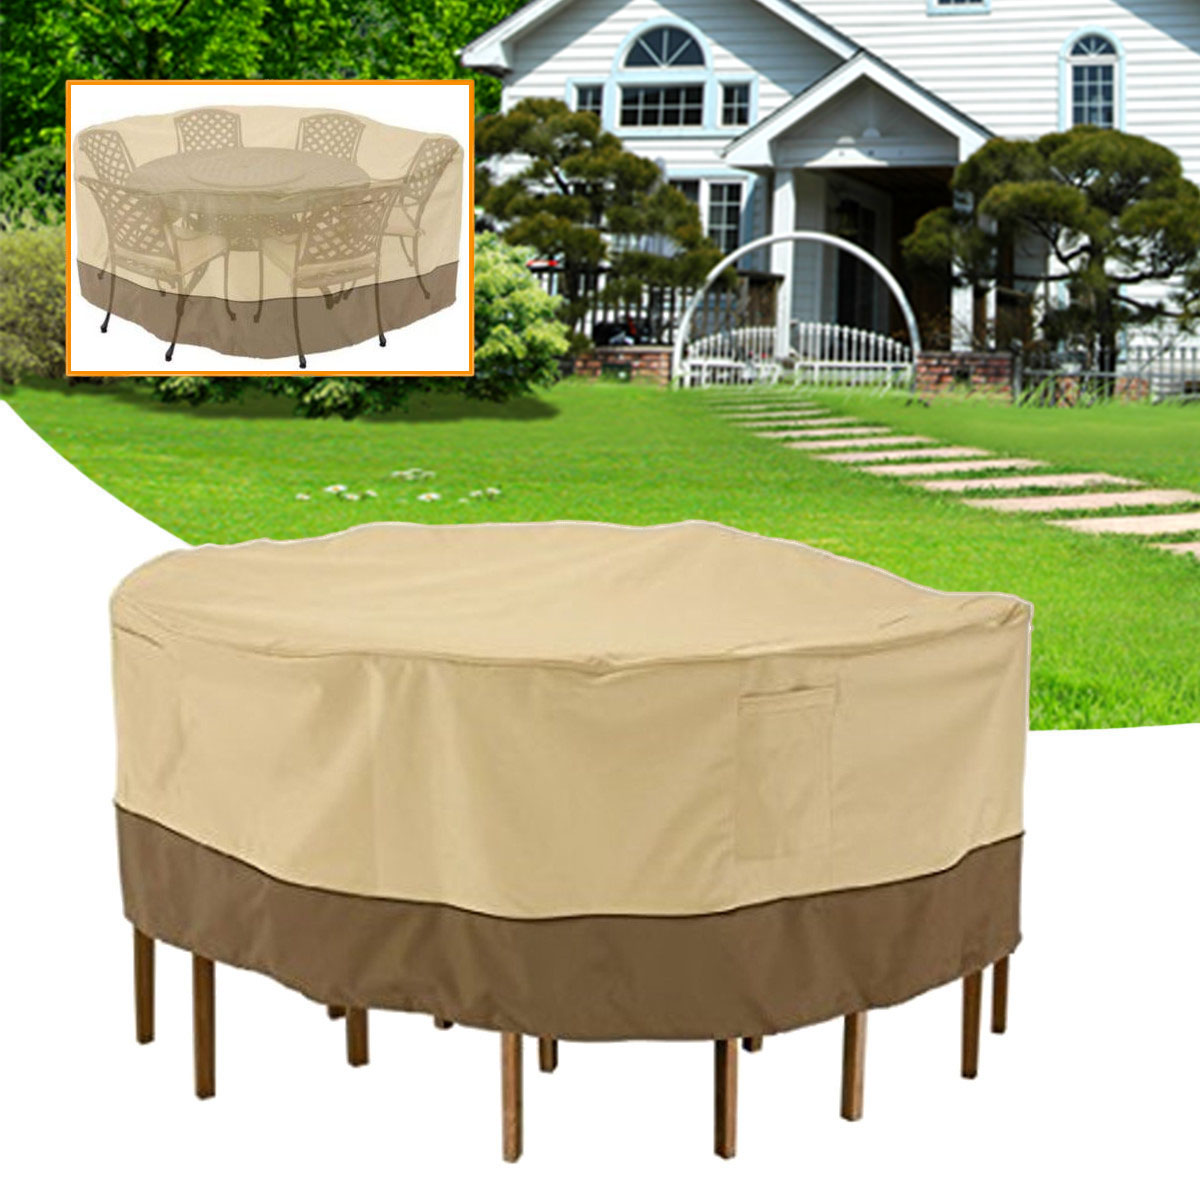 Garden Round Waterproof Table Cover Patio Outdoor Furniture Set Shelter Protection 1